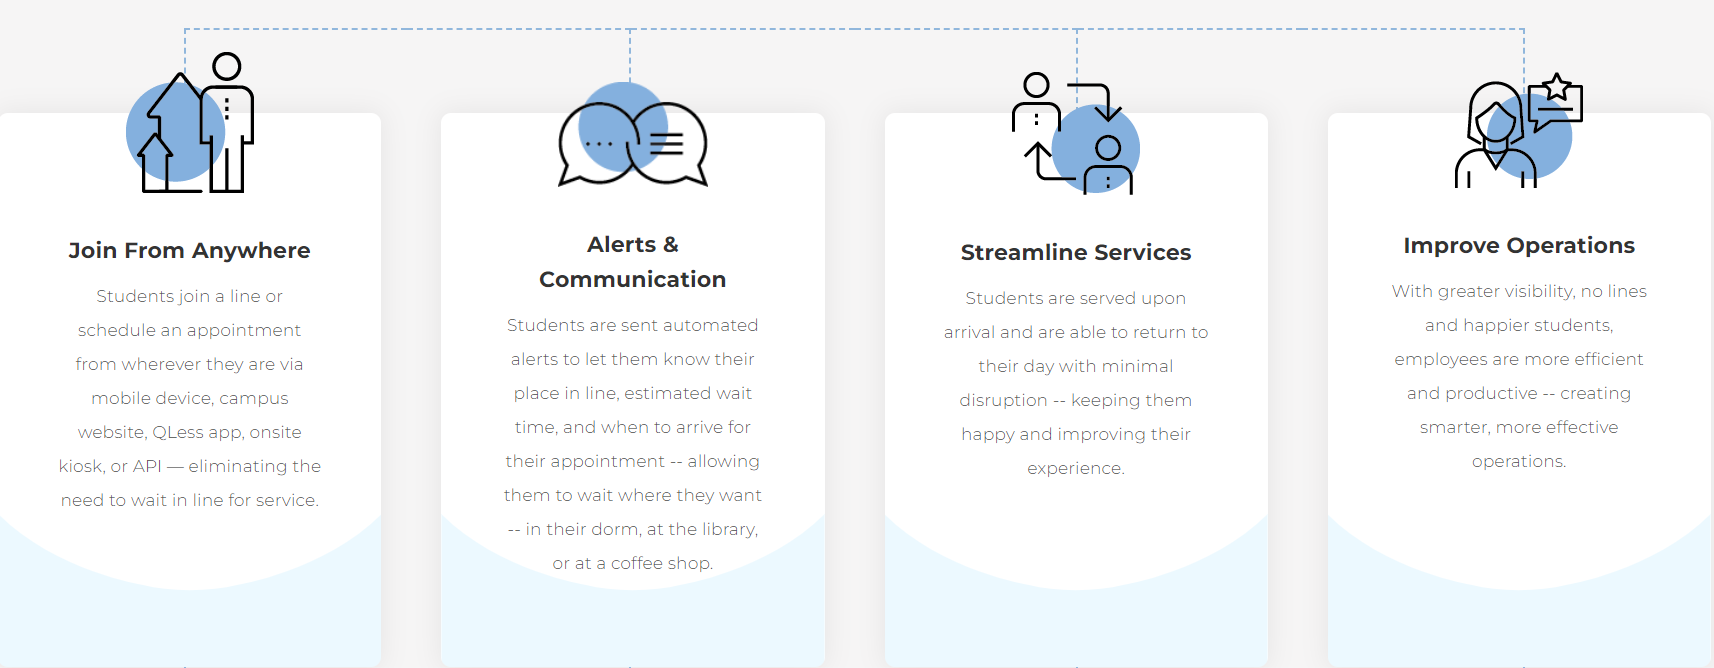 Qless highlights- join from anywhere, alerts and communication, streamlined services, and improved operations